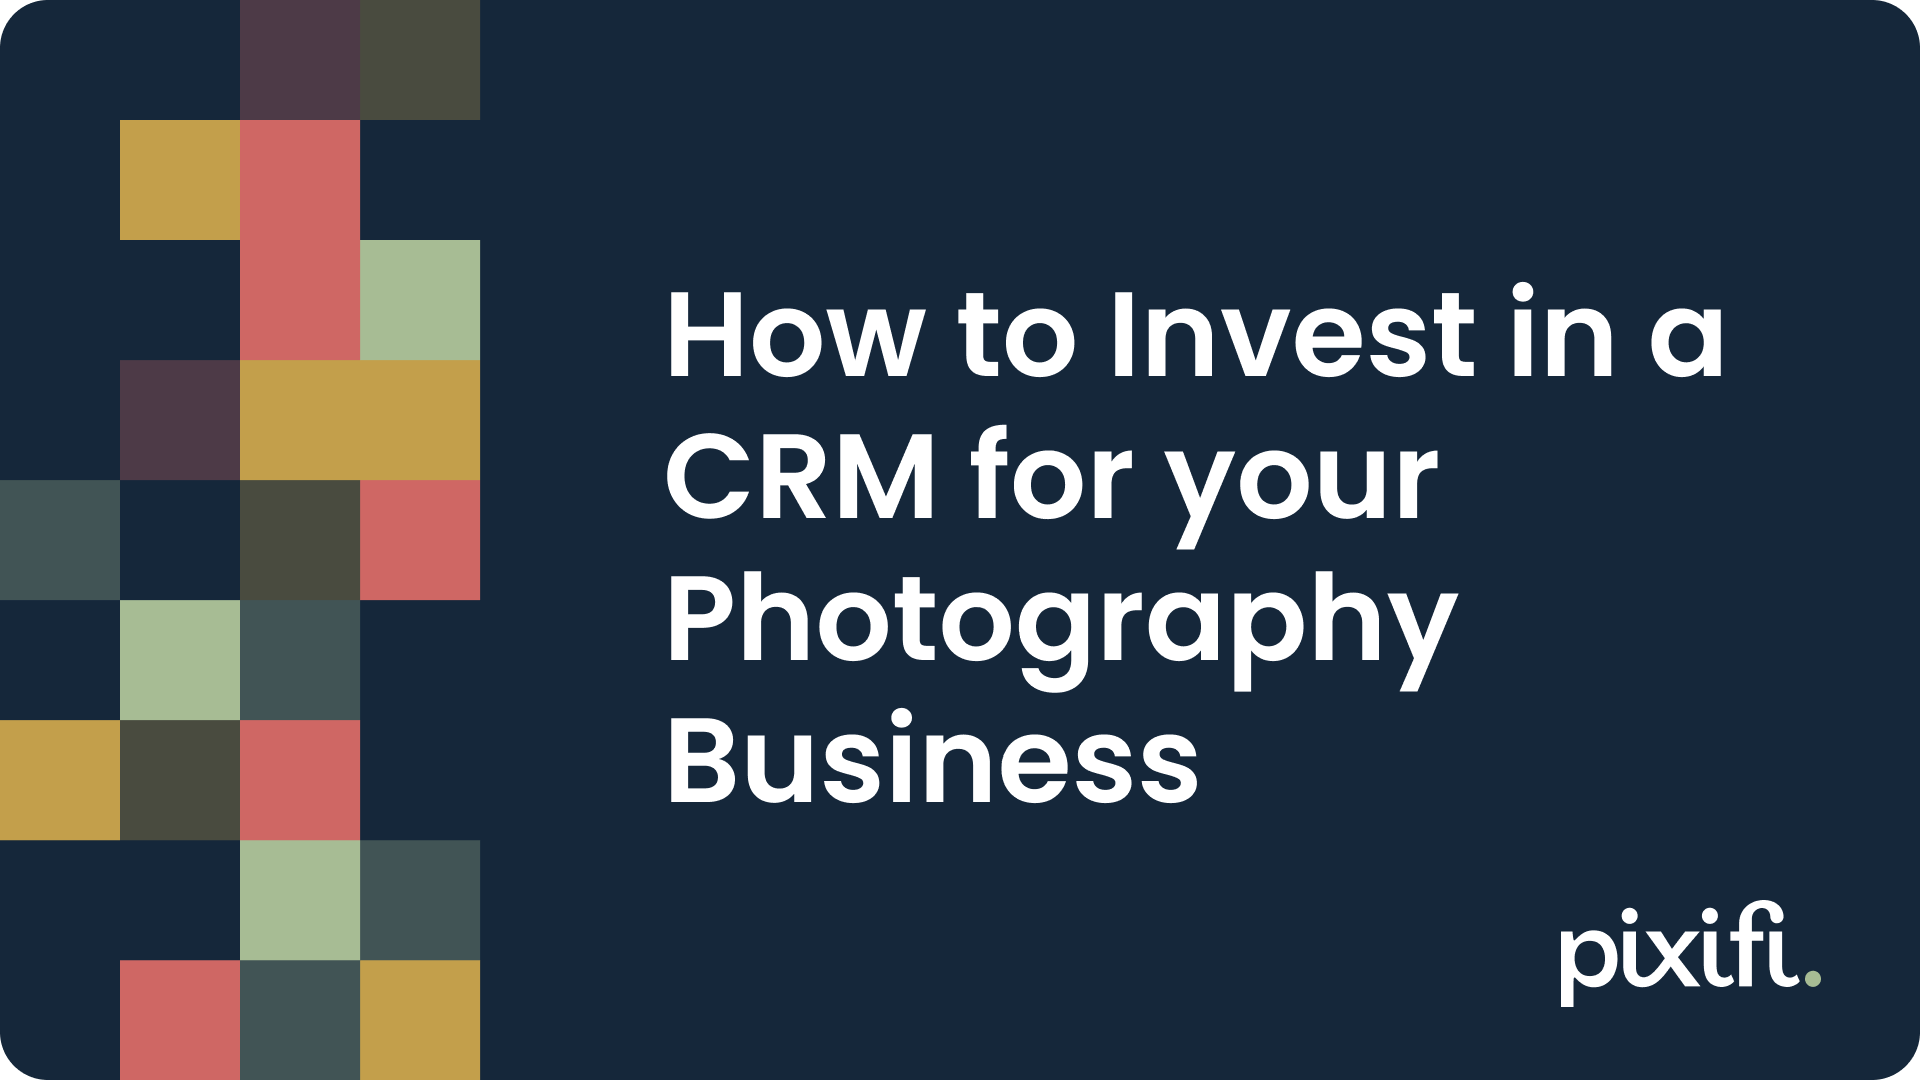 How to Invest in a CRM for your Photography Business